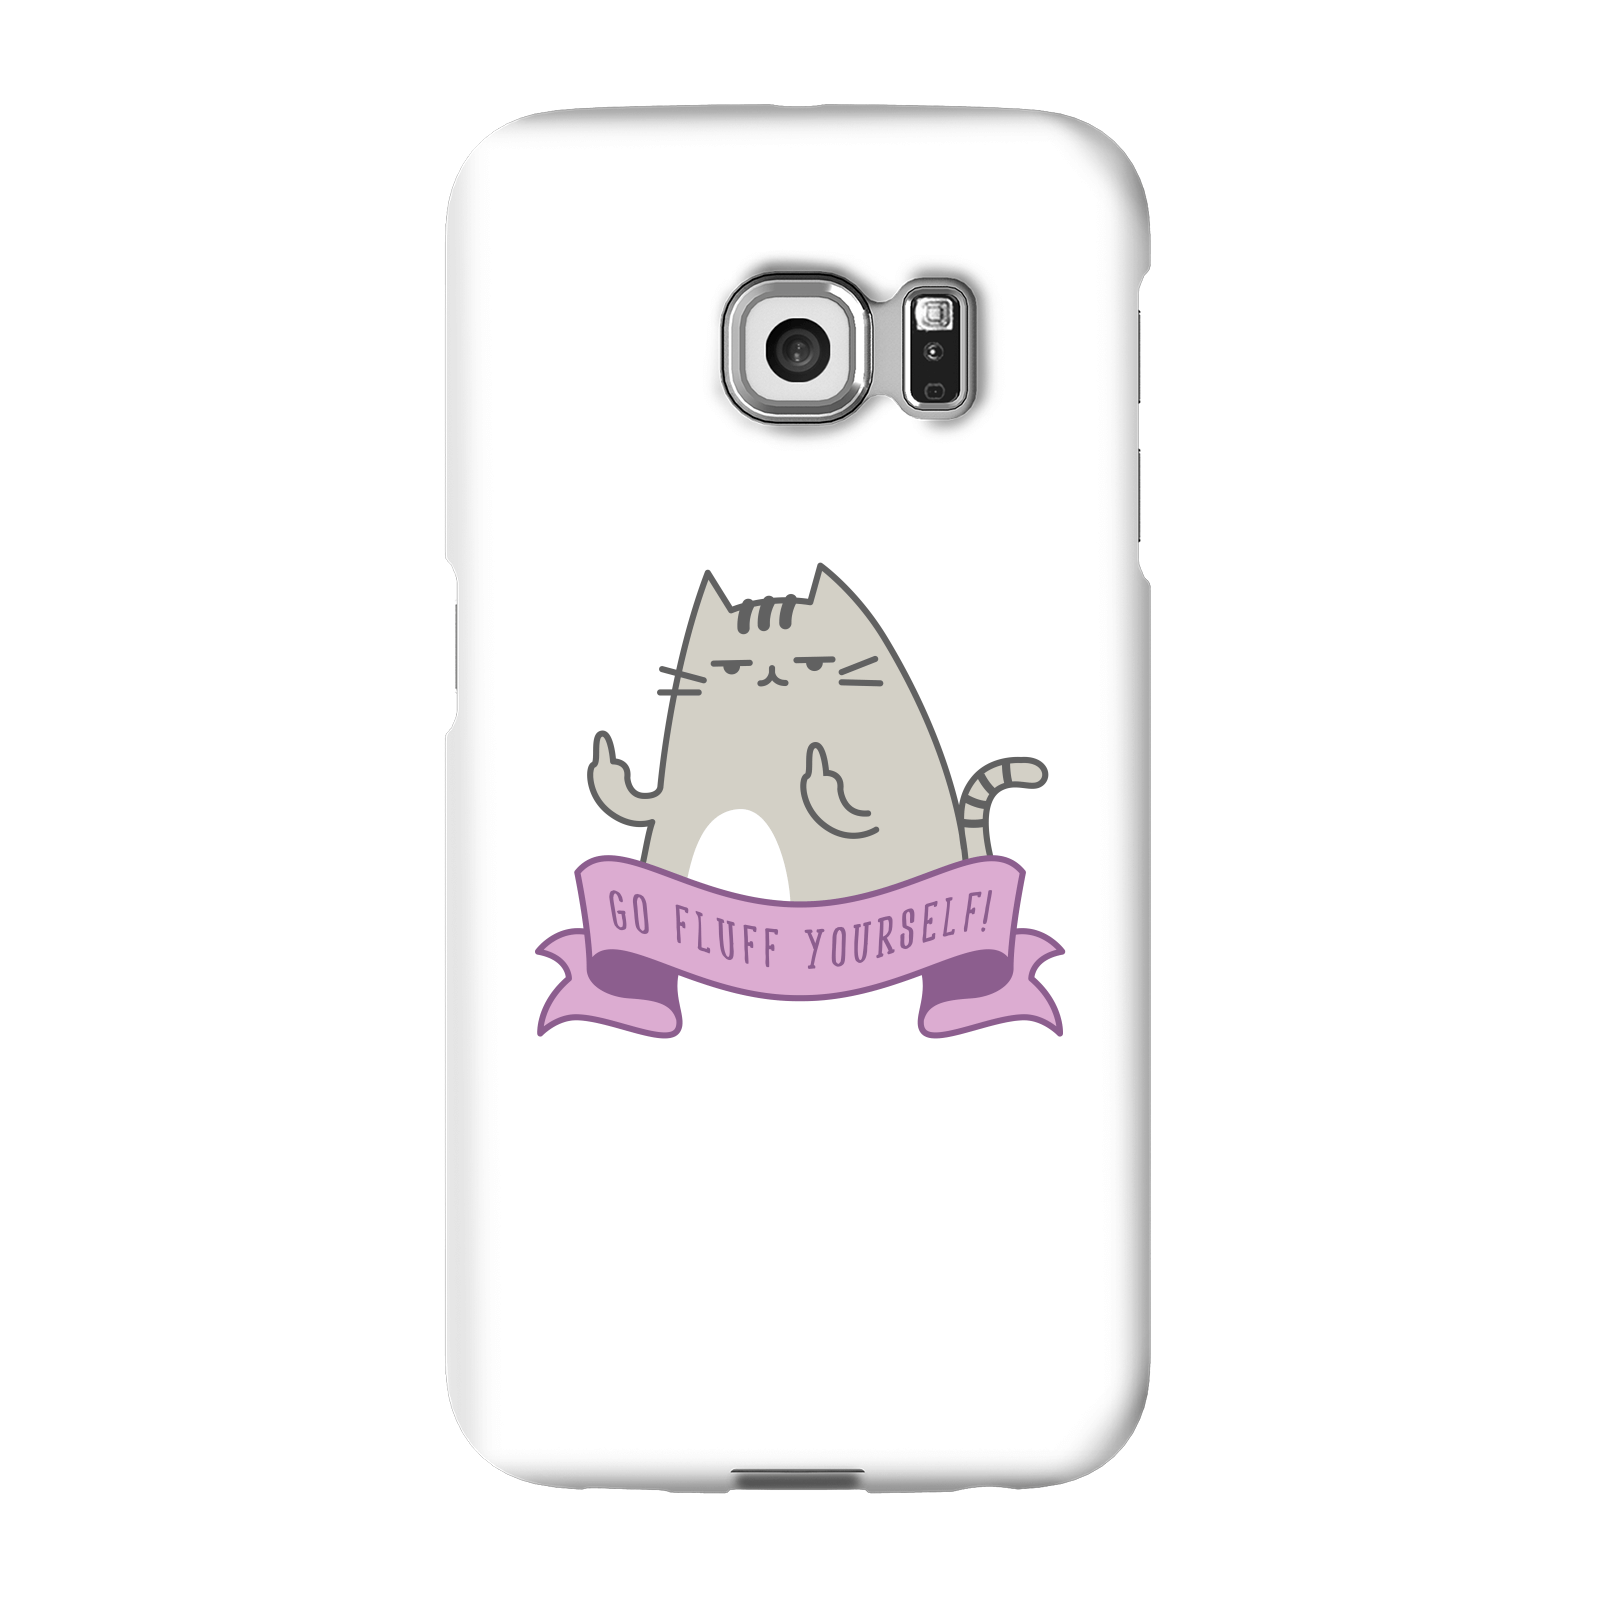 Go Fluff Yourself! Phone Case for iPhone and Android - Samsung S6 Edge - Snap Case - Matte